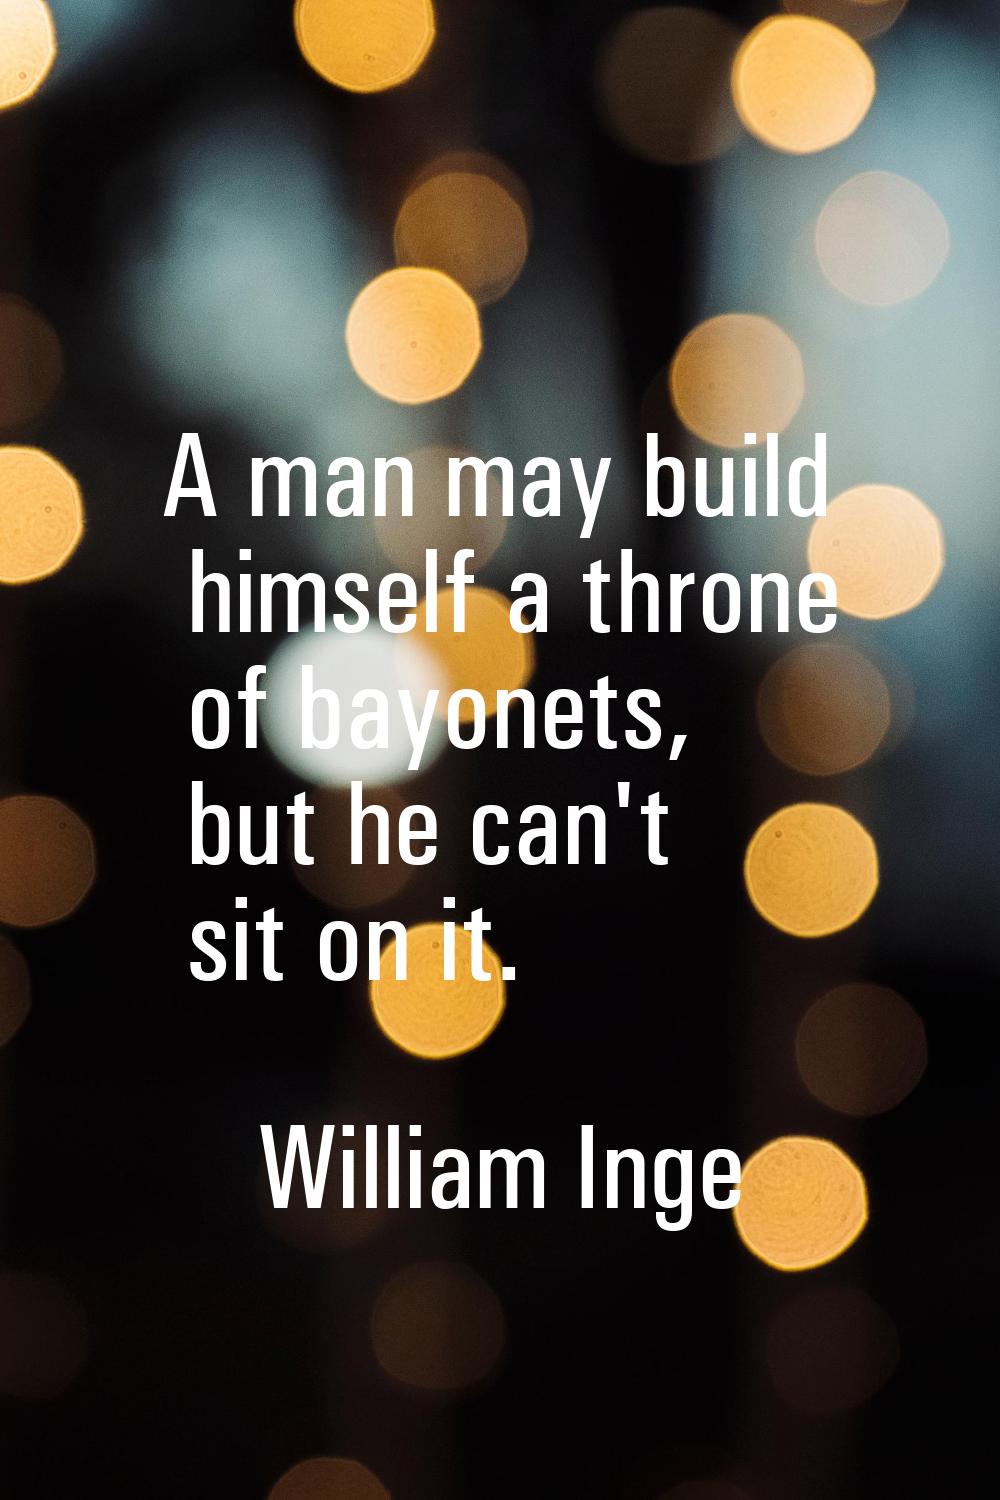 A man may build himself a throne of bayonets, but he can't sit on it.